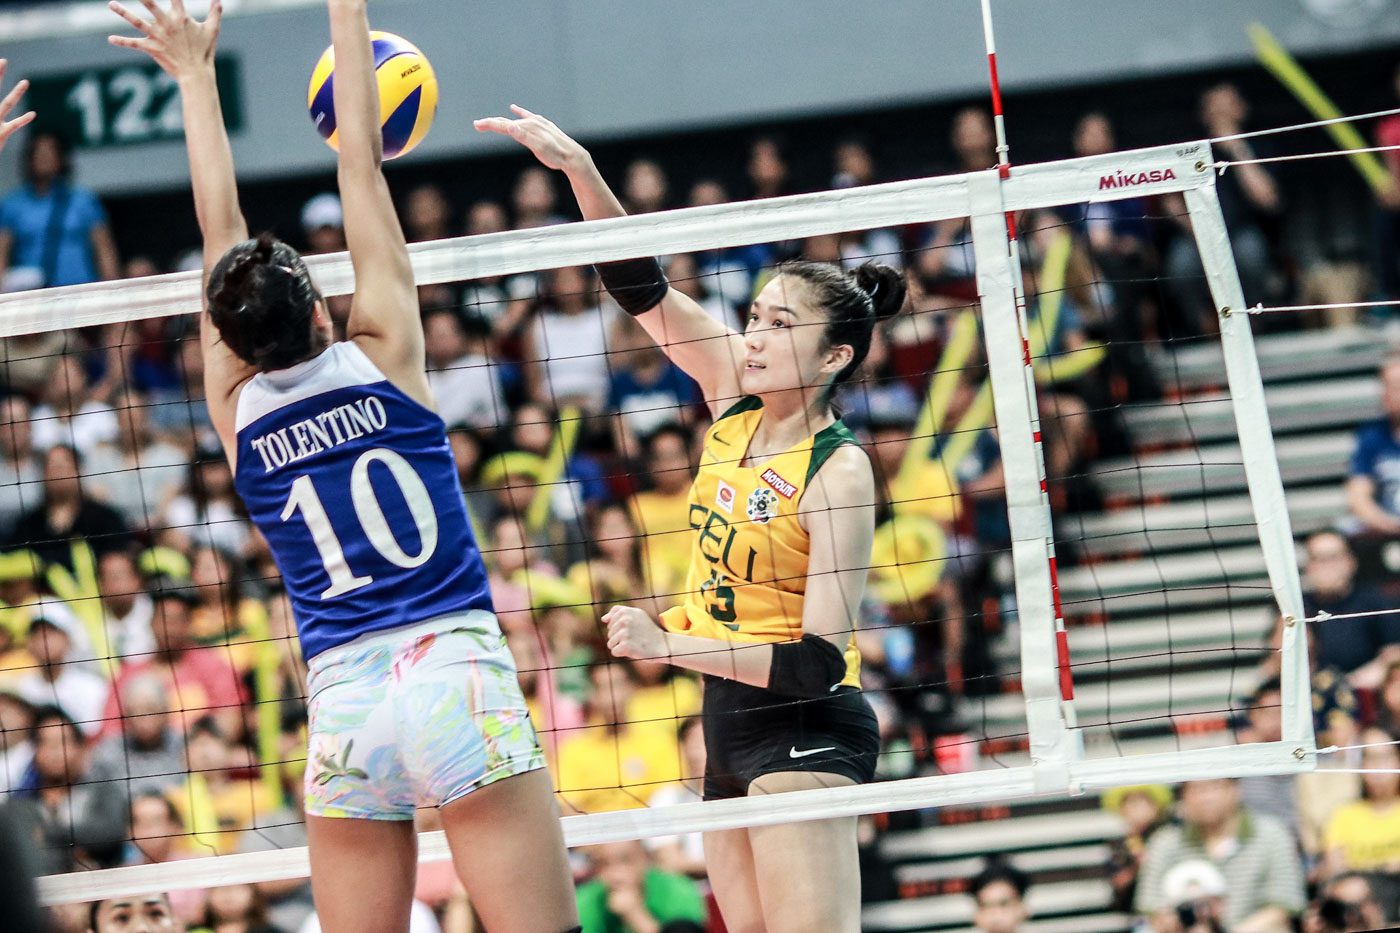 FEU stuns No. 1 Ateneo, forces do-or-die for UAAP title berth